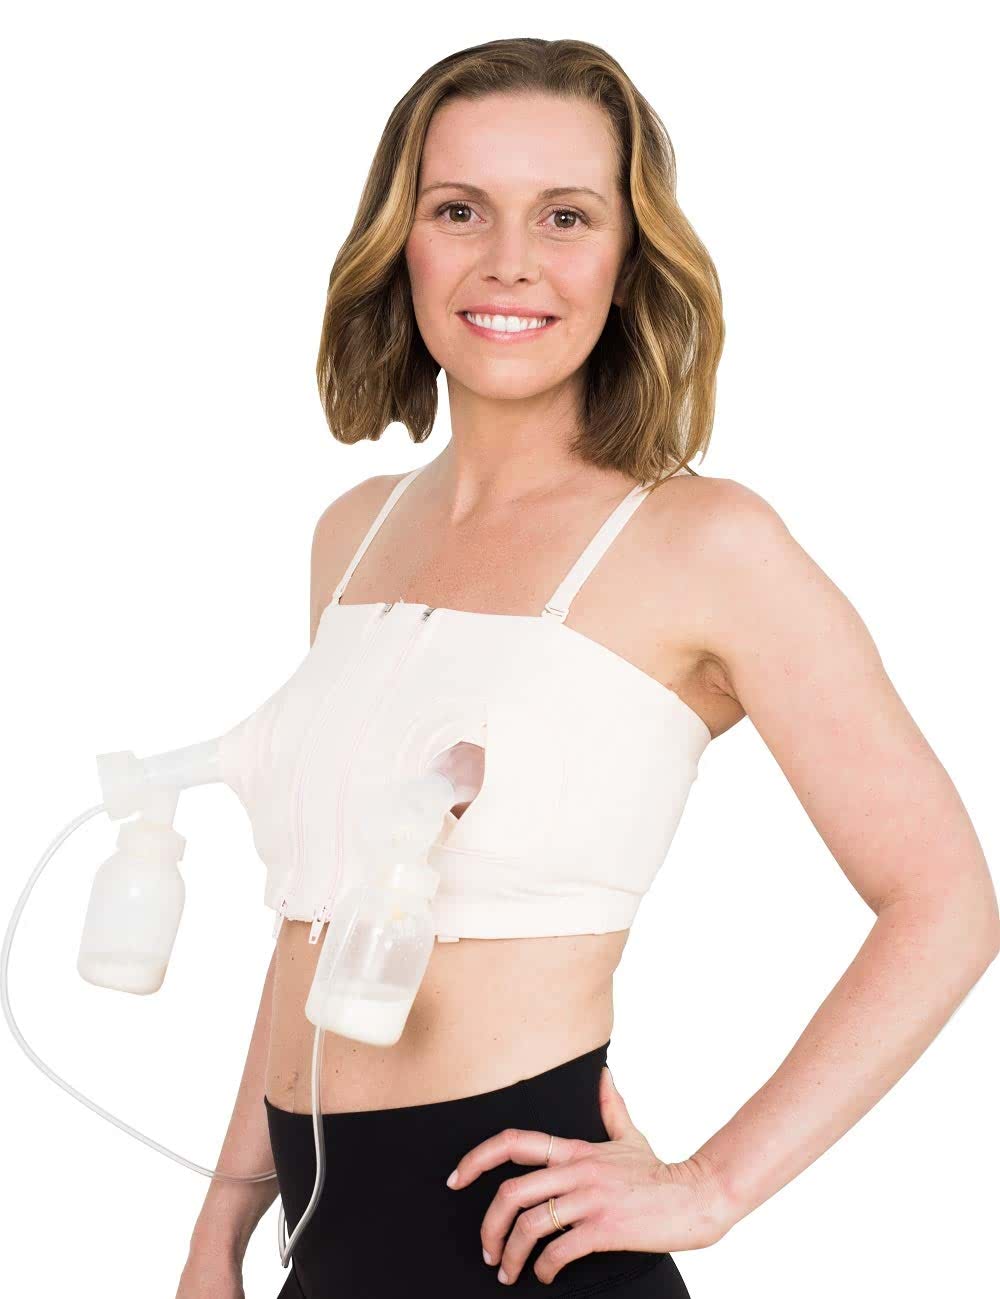 Best Overall Pumping Bra - Simple Wishes Signature Pumping Bra